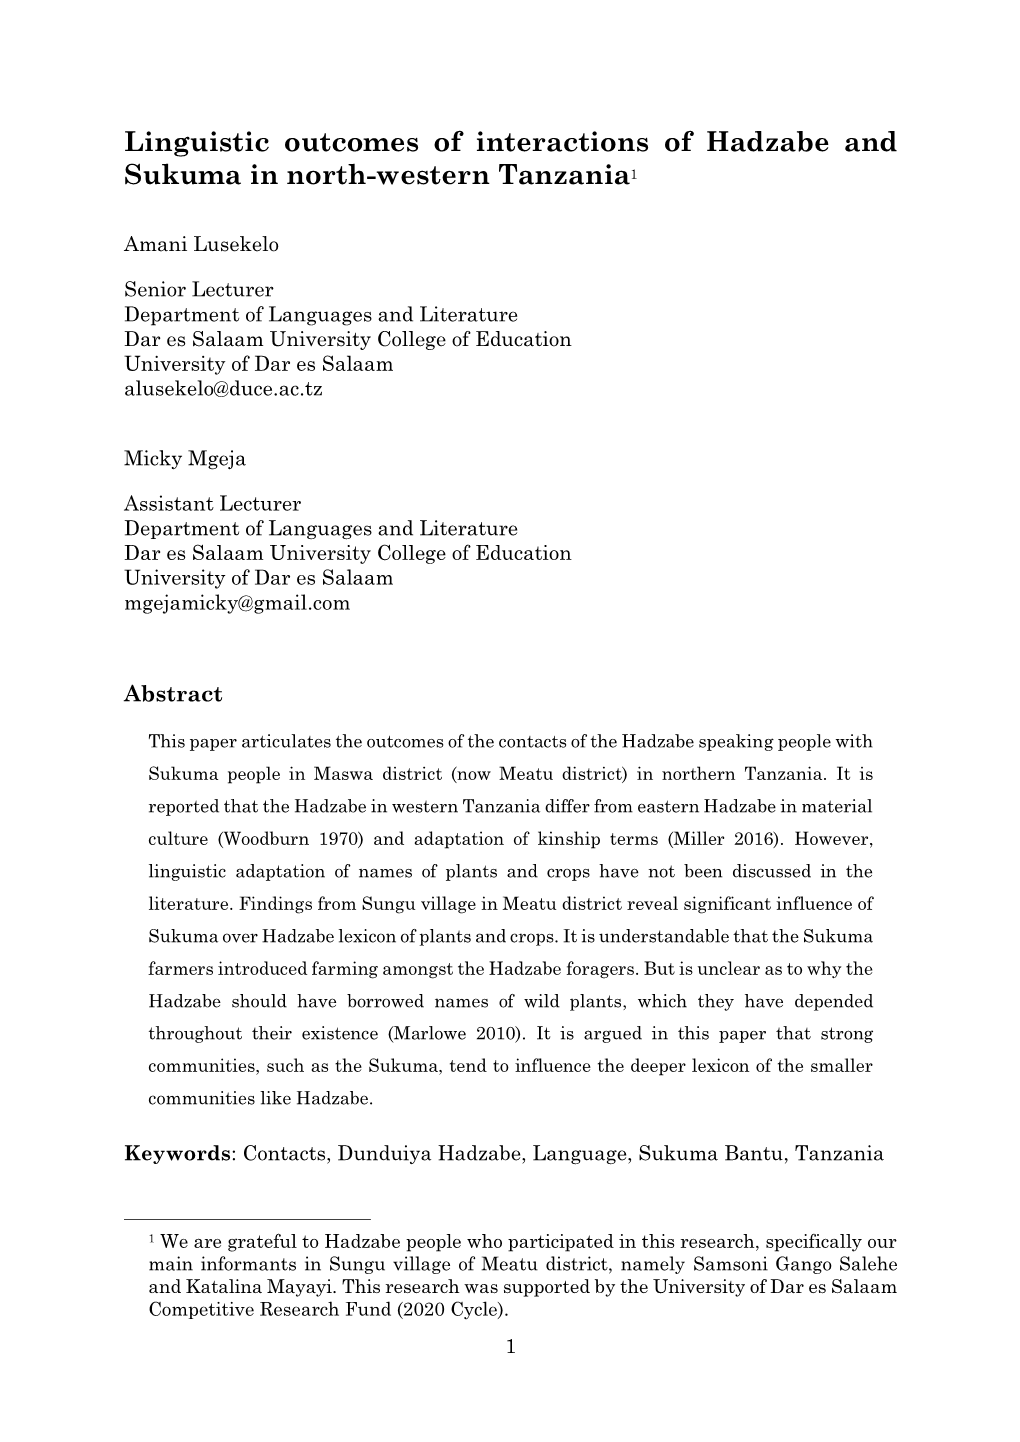 Linguistic Outcomes of Interactions of Hadzabe and Sukuma in North-Western Tanzania1